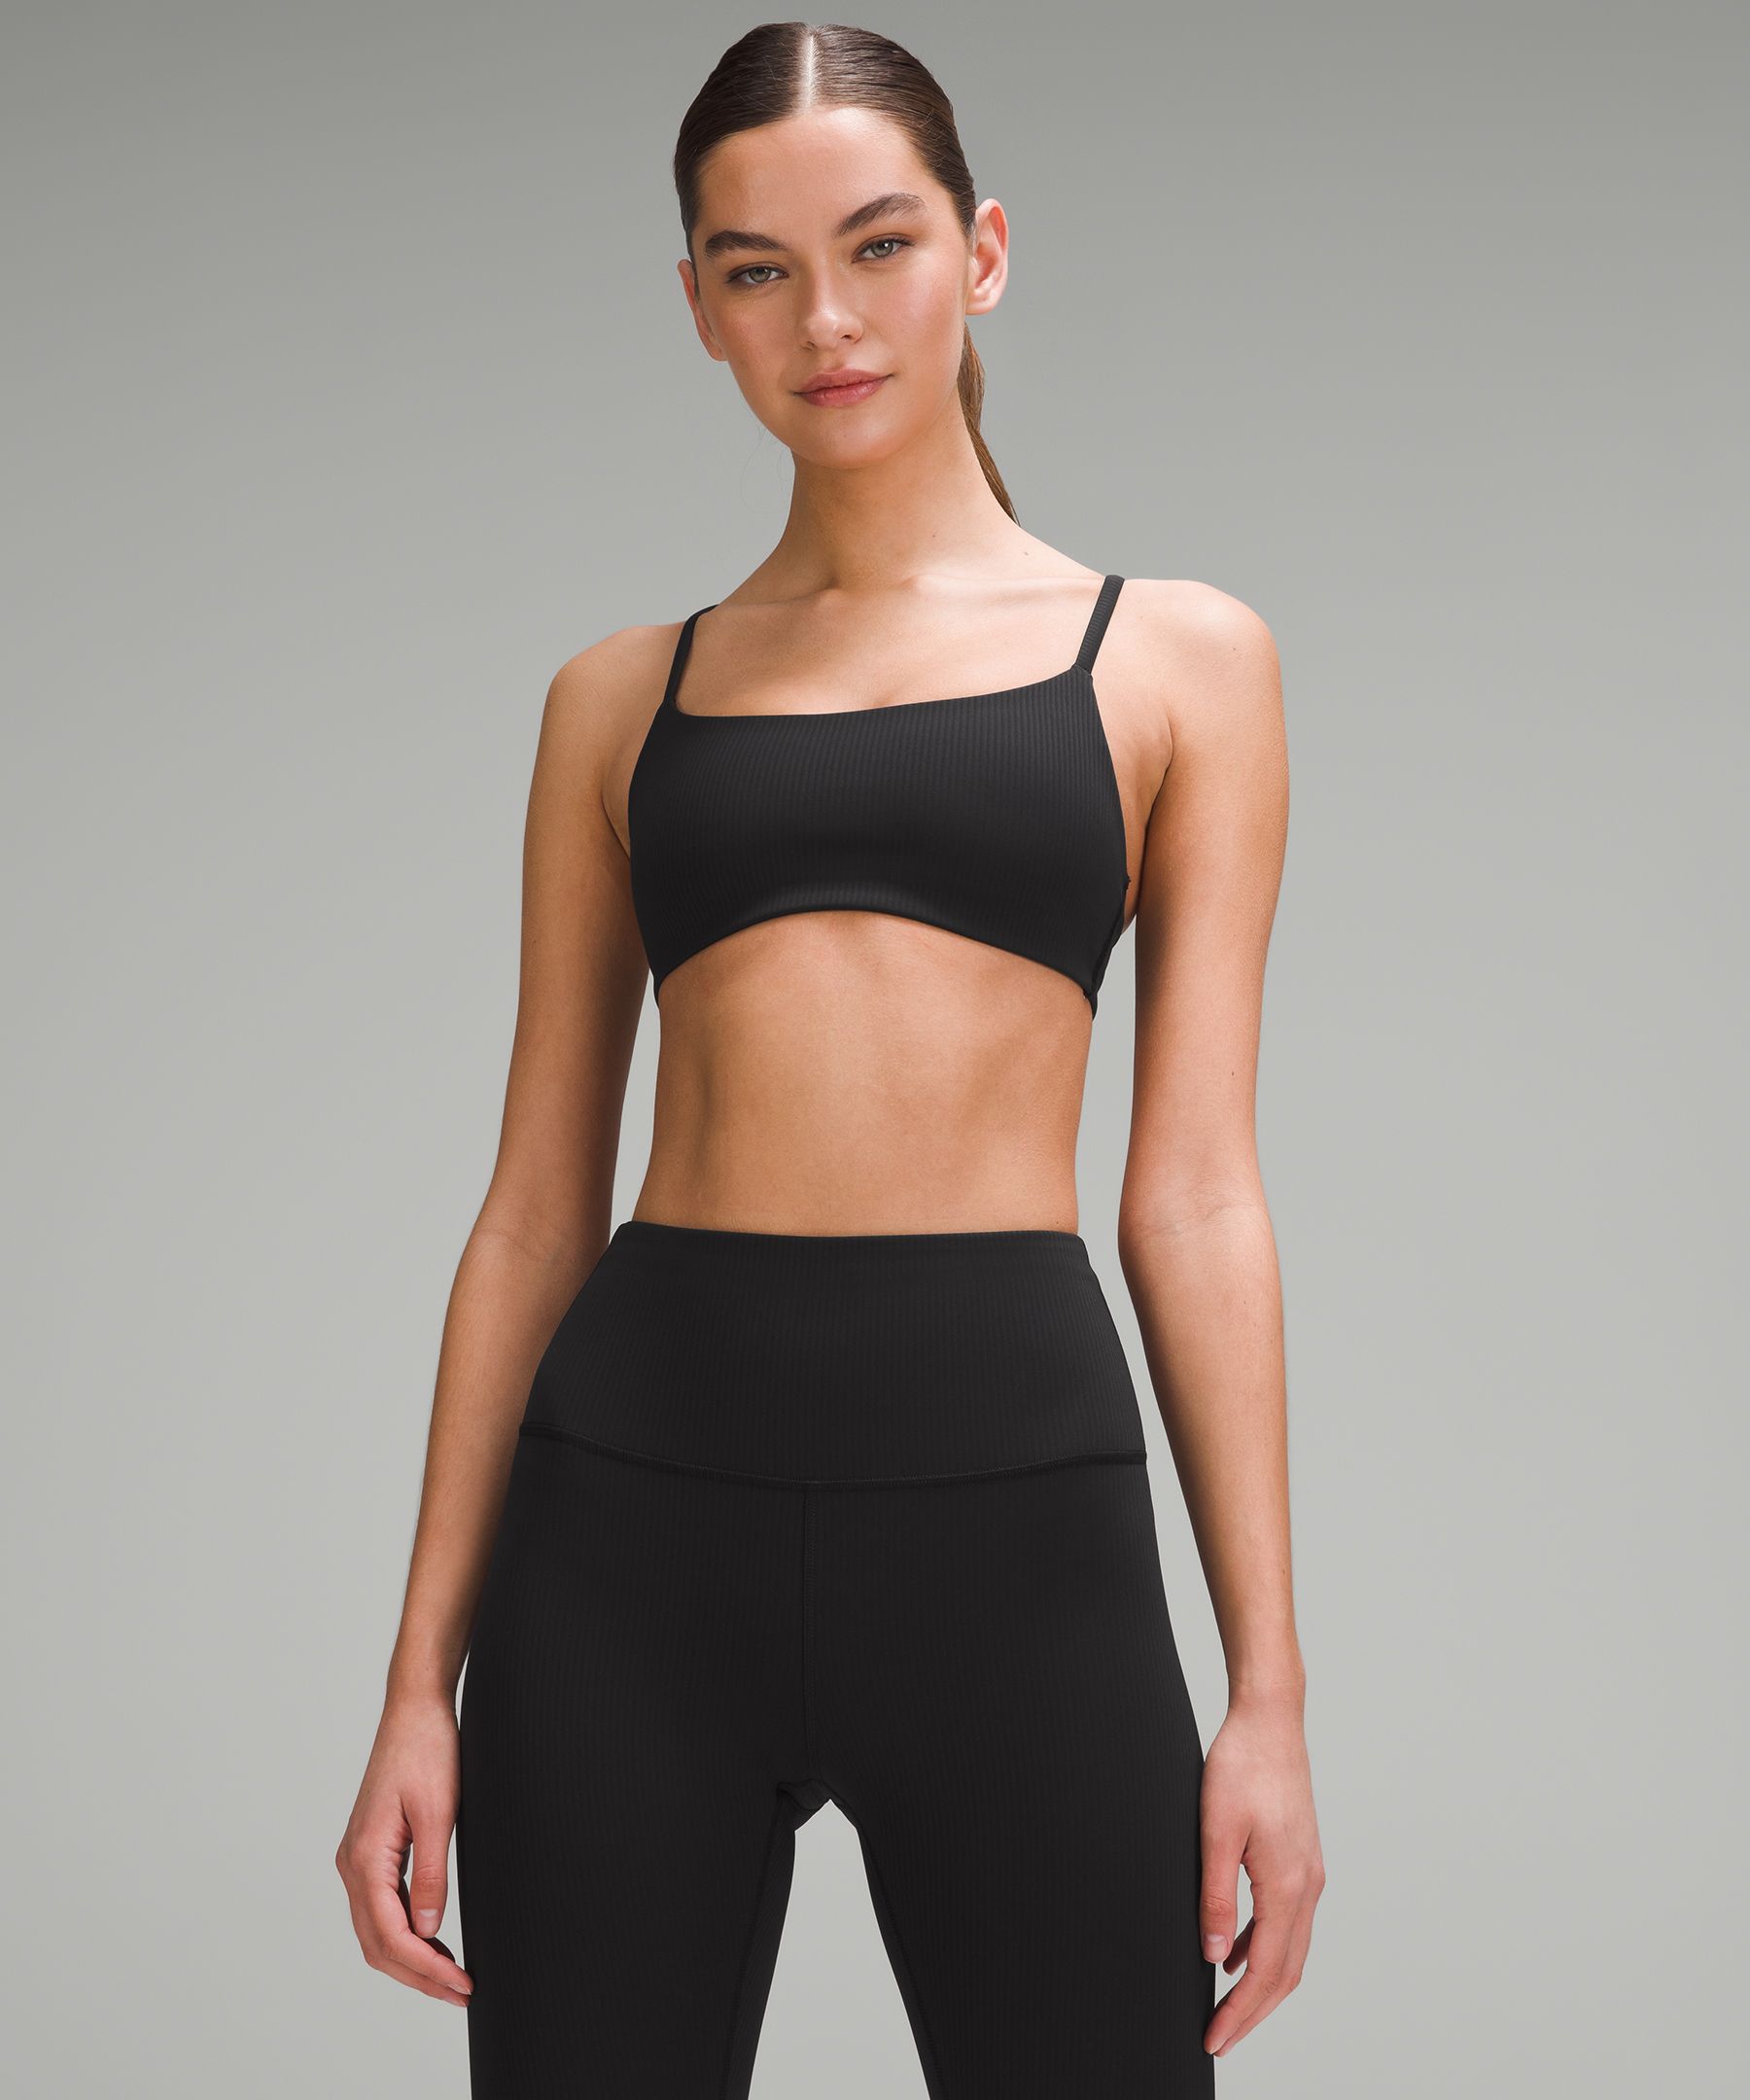 Lululemon athletica Wunder Train Strappy Racer Bra Ribbed *Light Support,  A/B Cup, Women's Bras